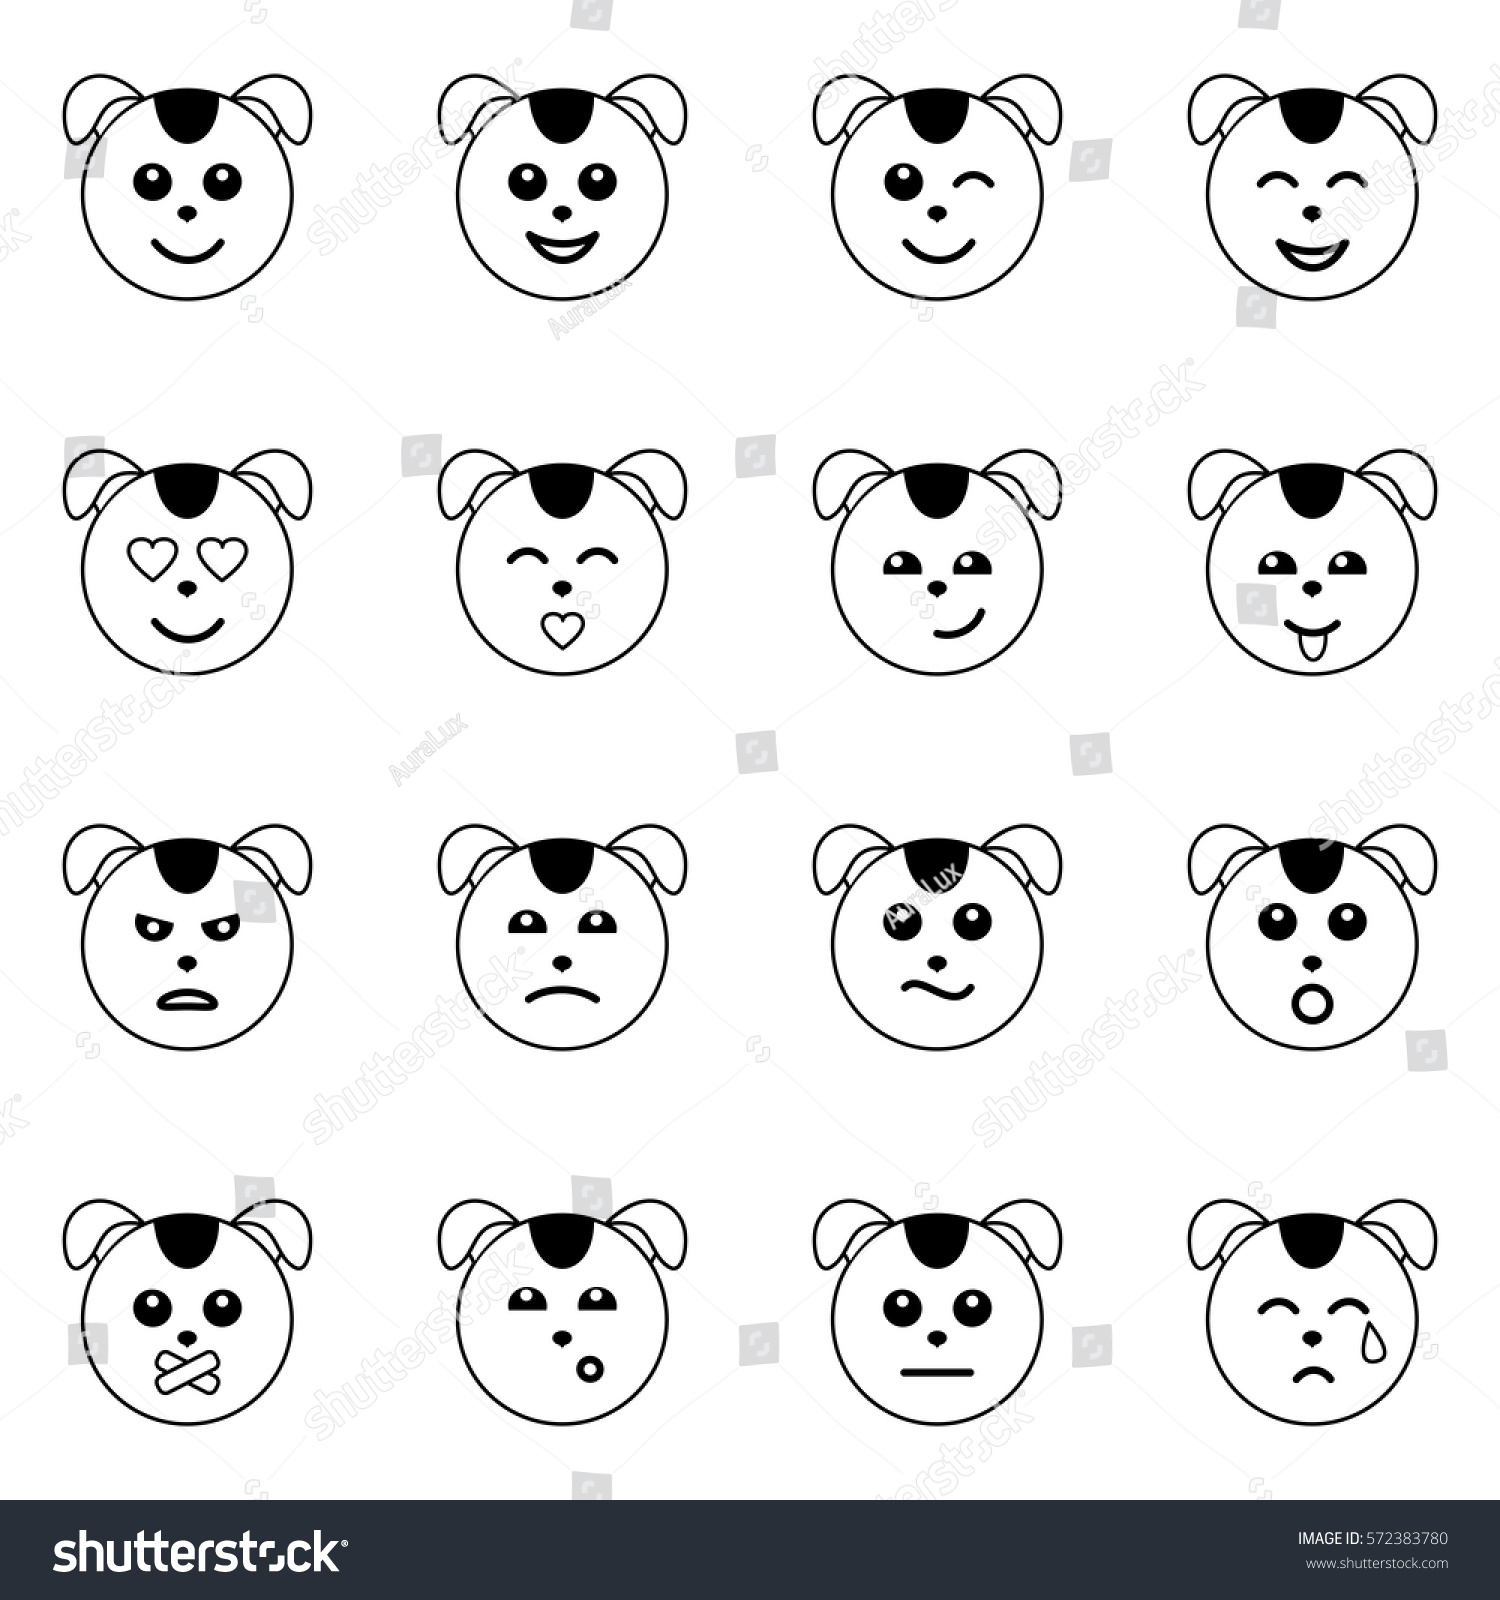 Download Emotional Dog Face Outline Icons Isolated Stock Vector ...